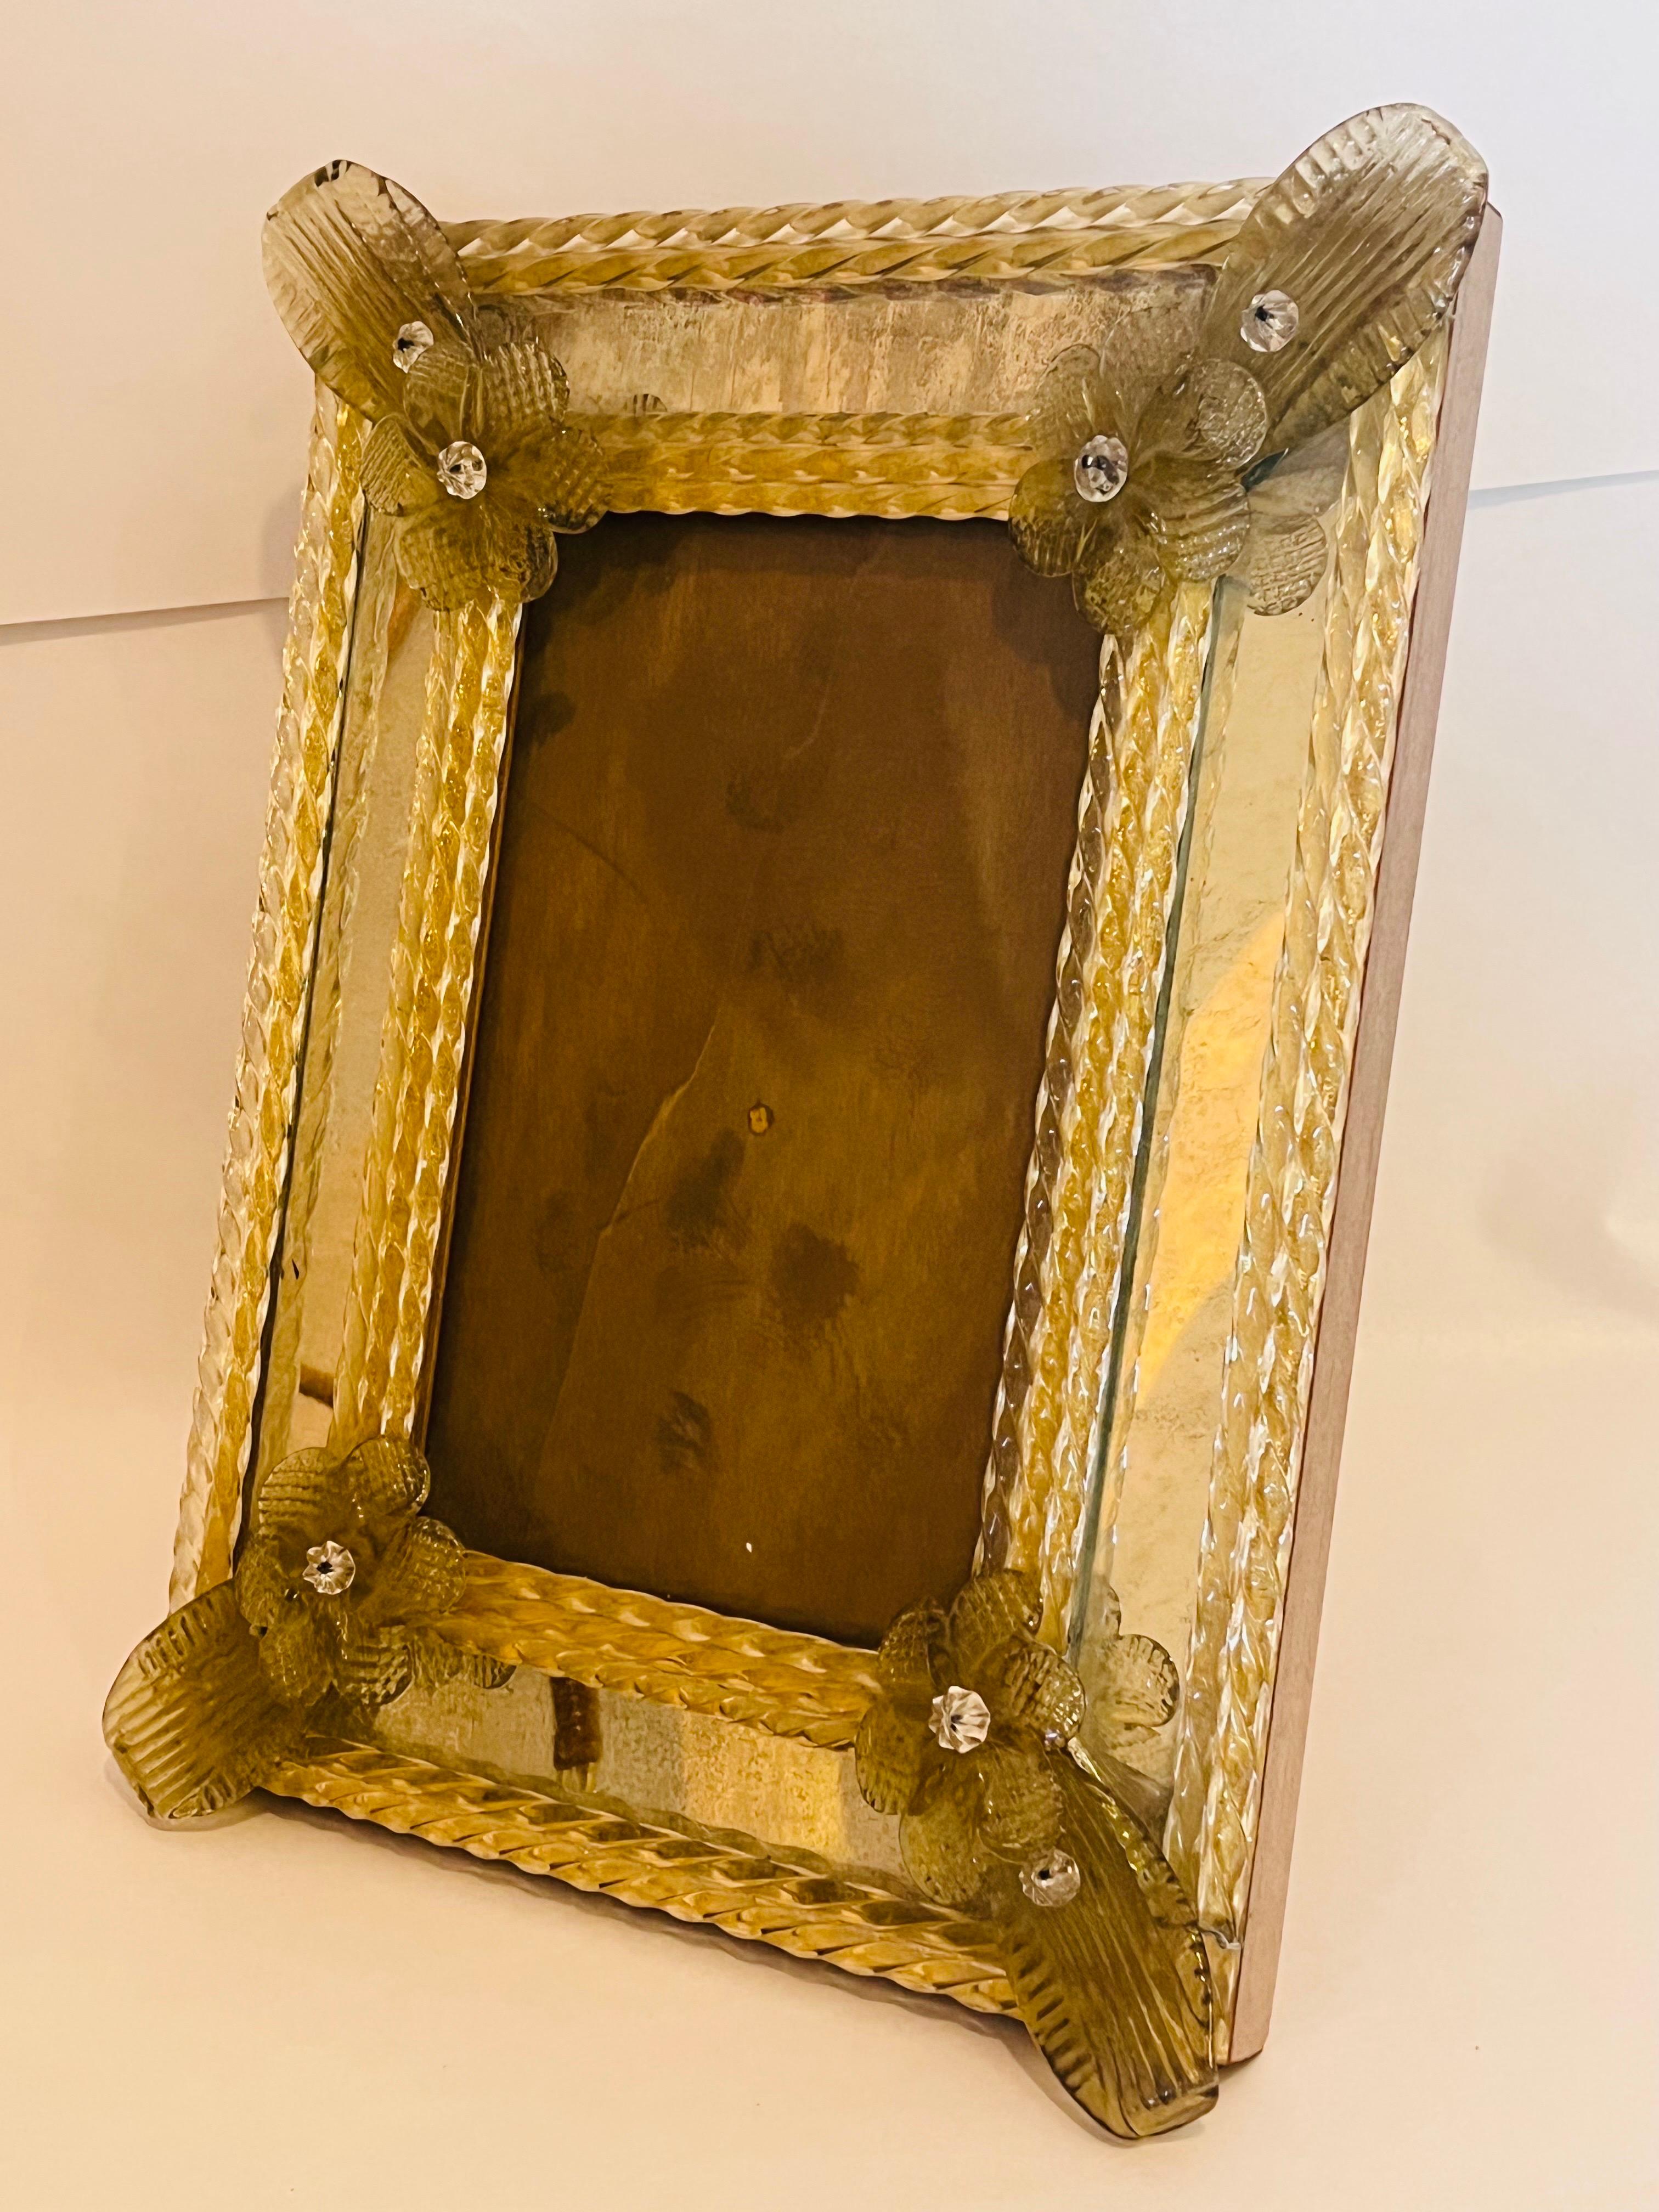 Ornate Venetian Murano Glass Picture or Photograph Frame Desk or Table Accessory 9